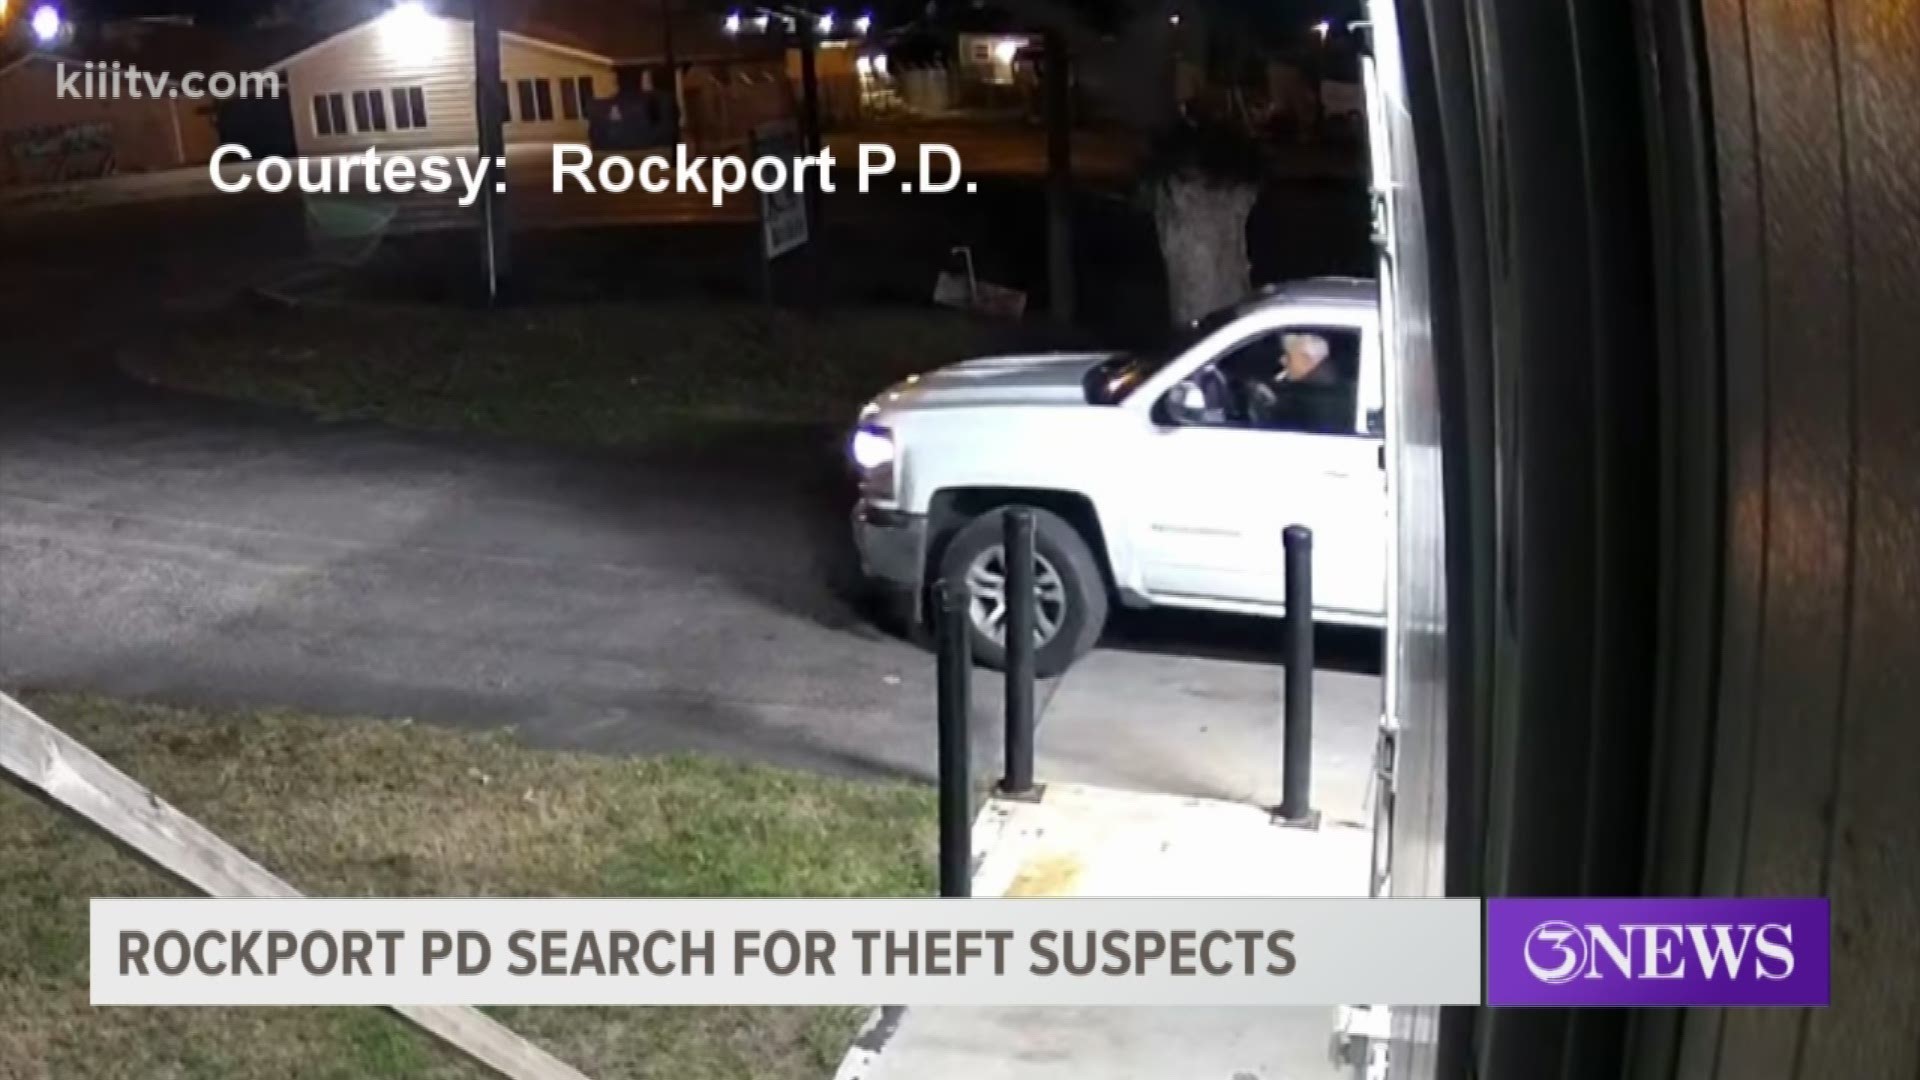 It was early in the morning on Monday, Dec. 30, when security cameras captured images of the white pickup truck outside a home in the 900 block of Business 35 South.